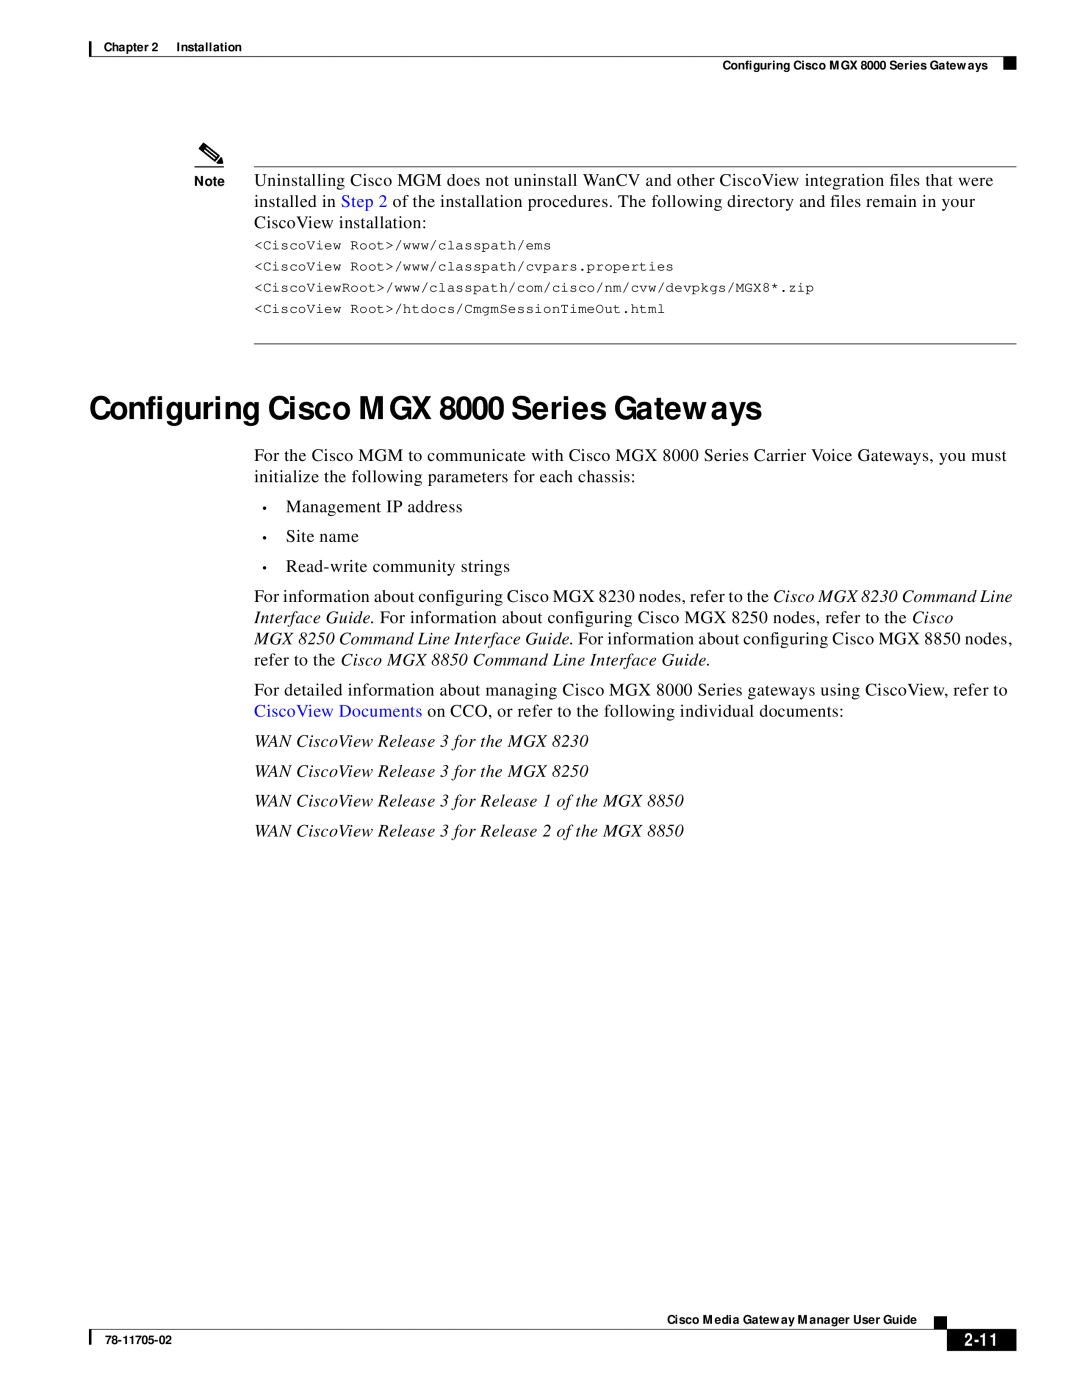 Cisco Systems manual Configuring Cisco MGX 8000 Series Gateways, WAN CiscoView Release 3 for the MGX, 2-11 